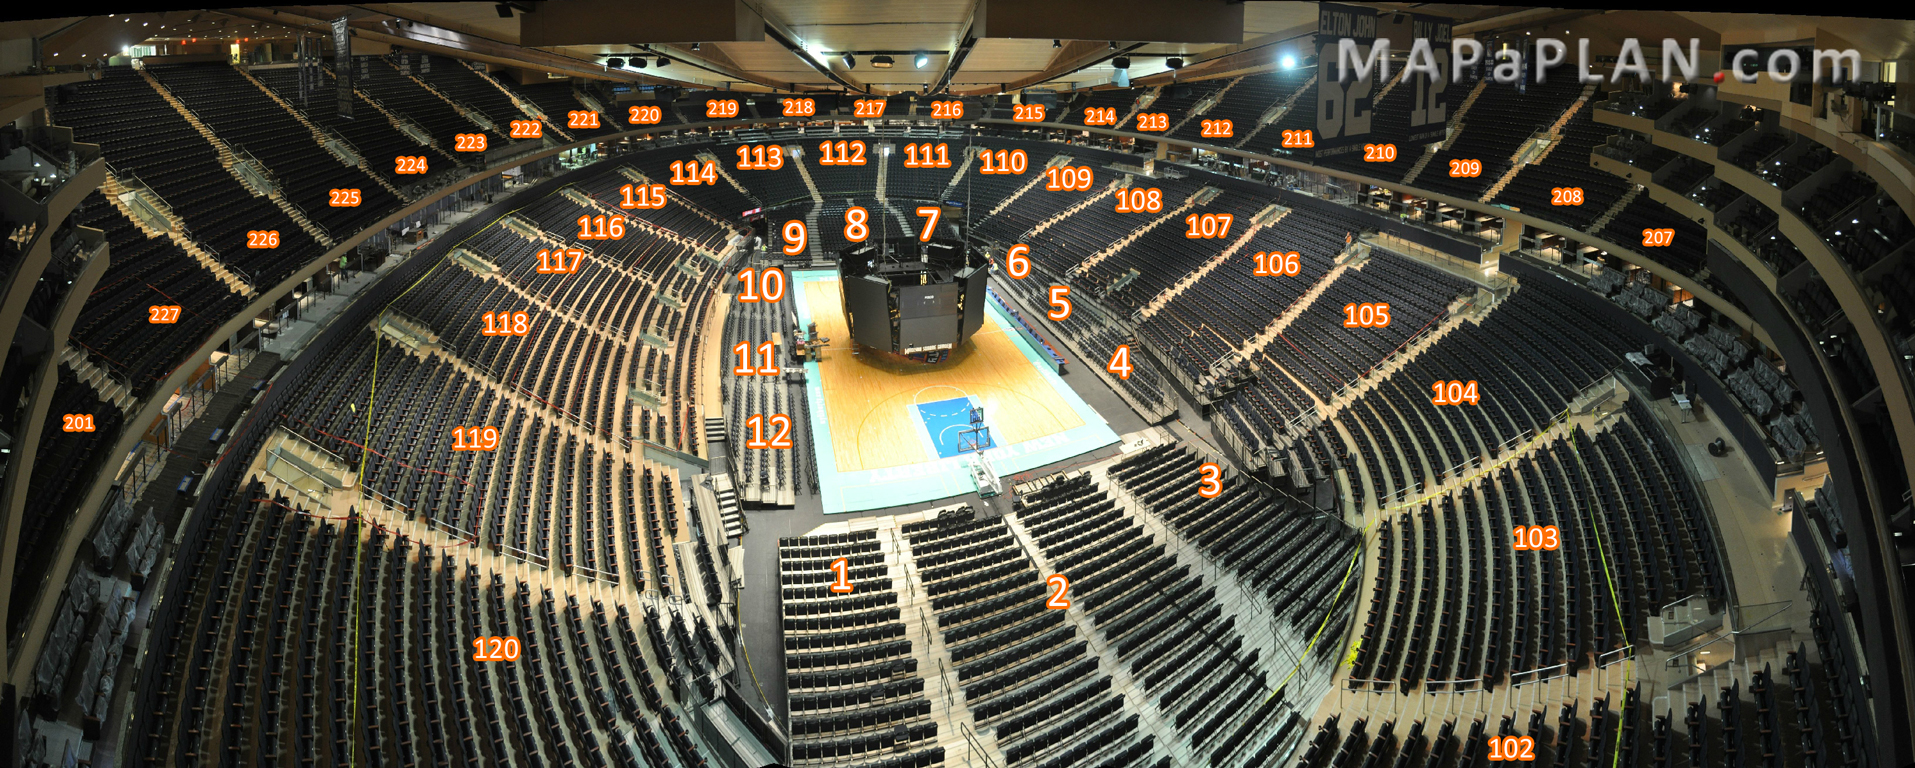 Madison square garden seating chart Interactive basketball 3d panoramic photo